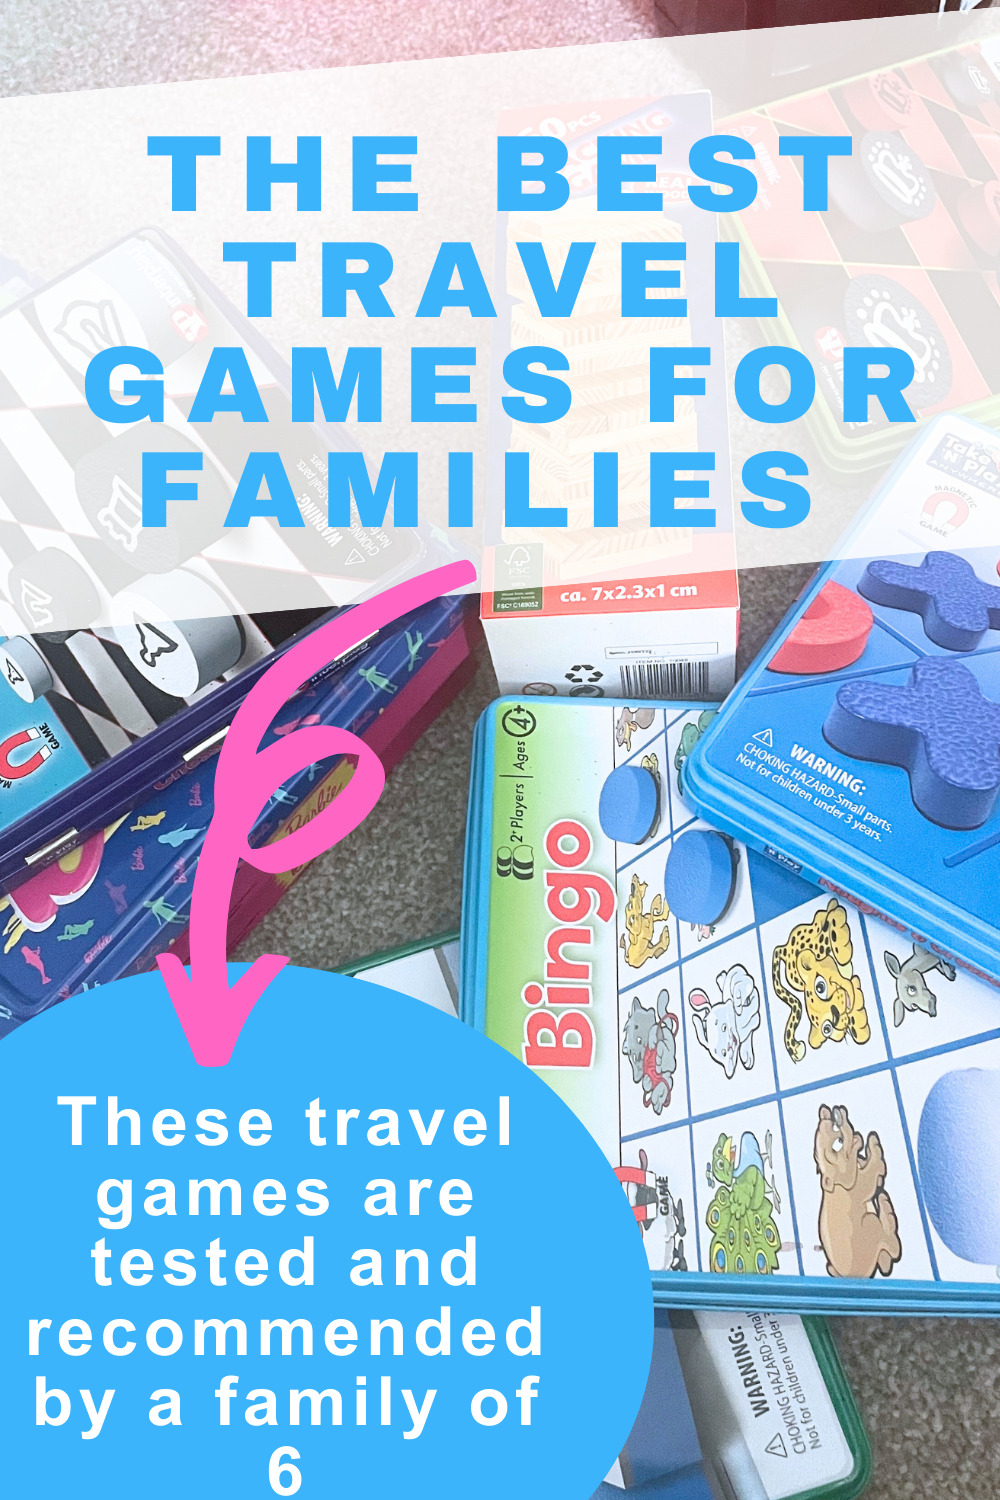 Travel games to take on holiday